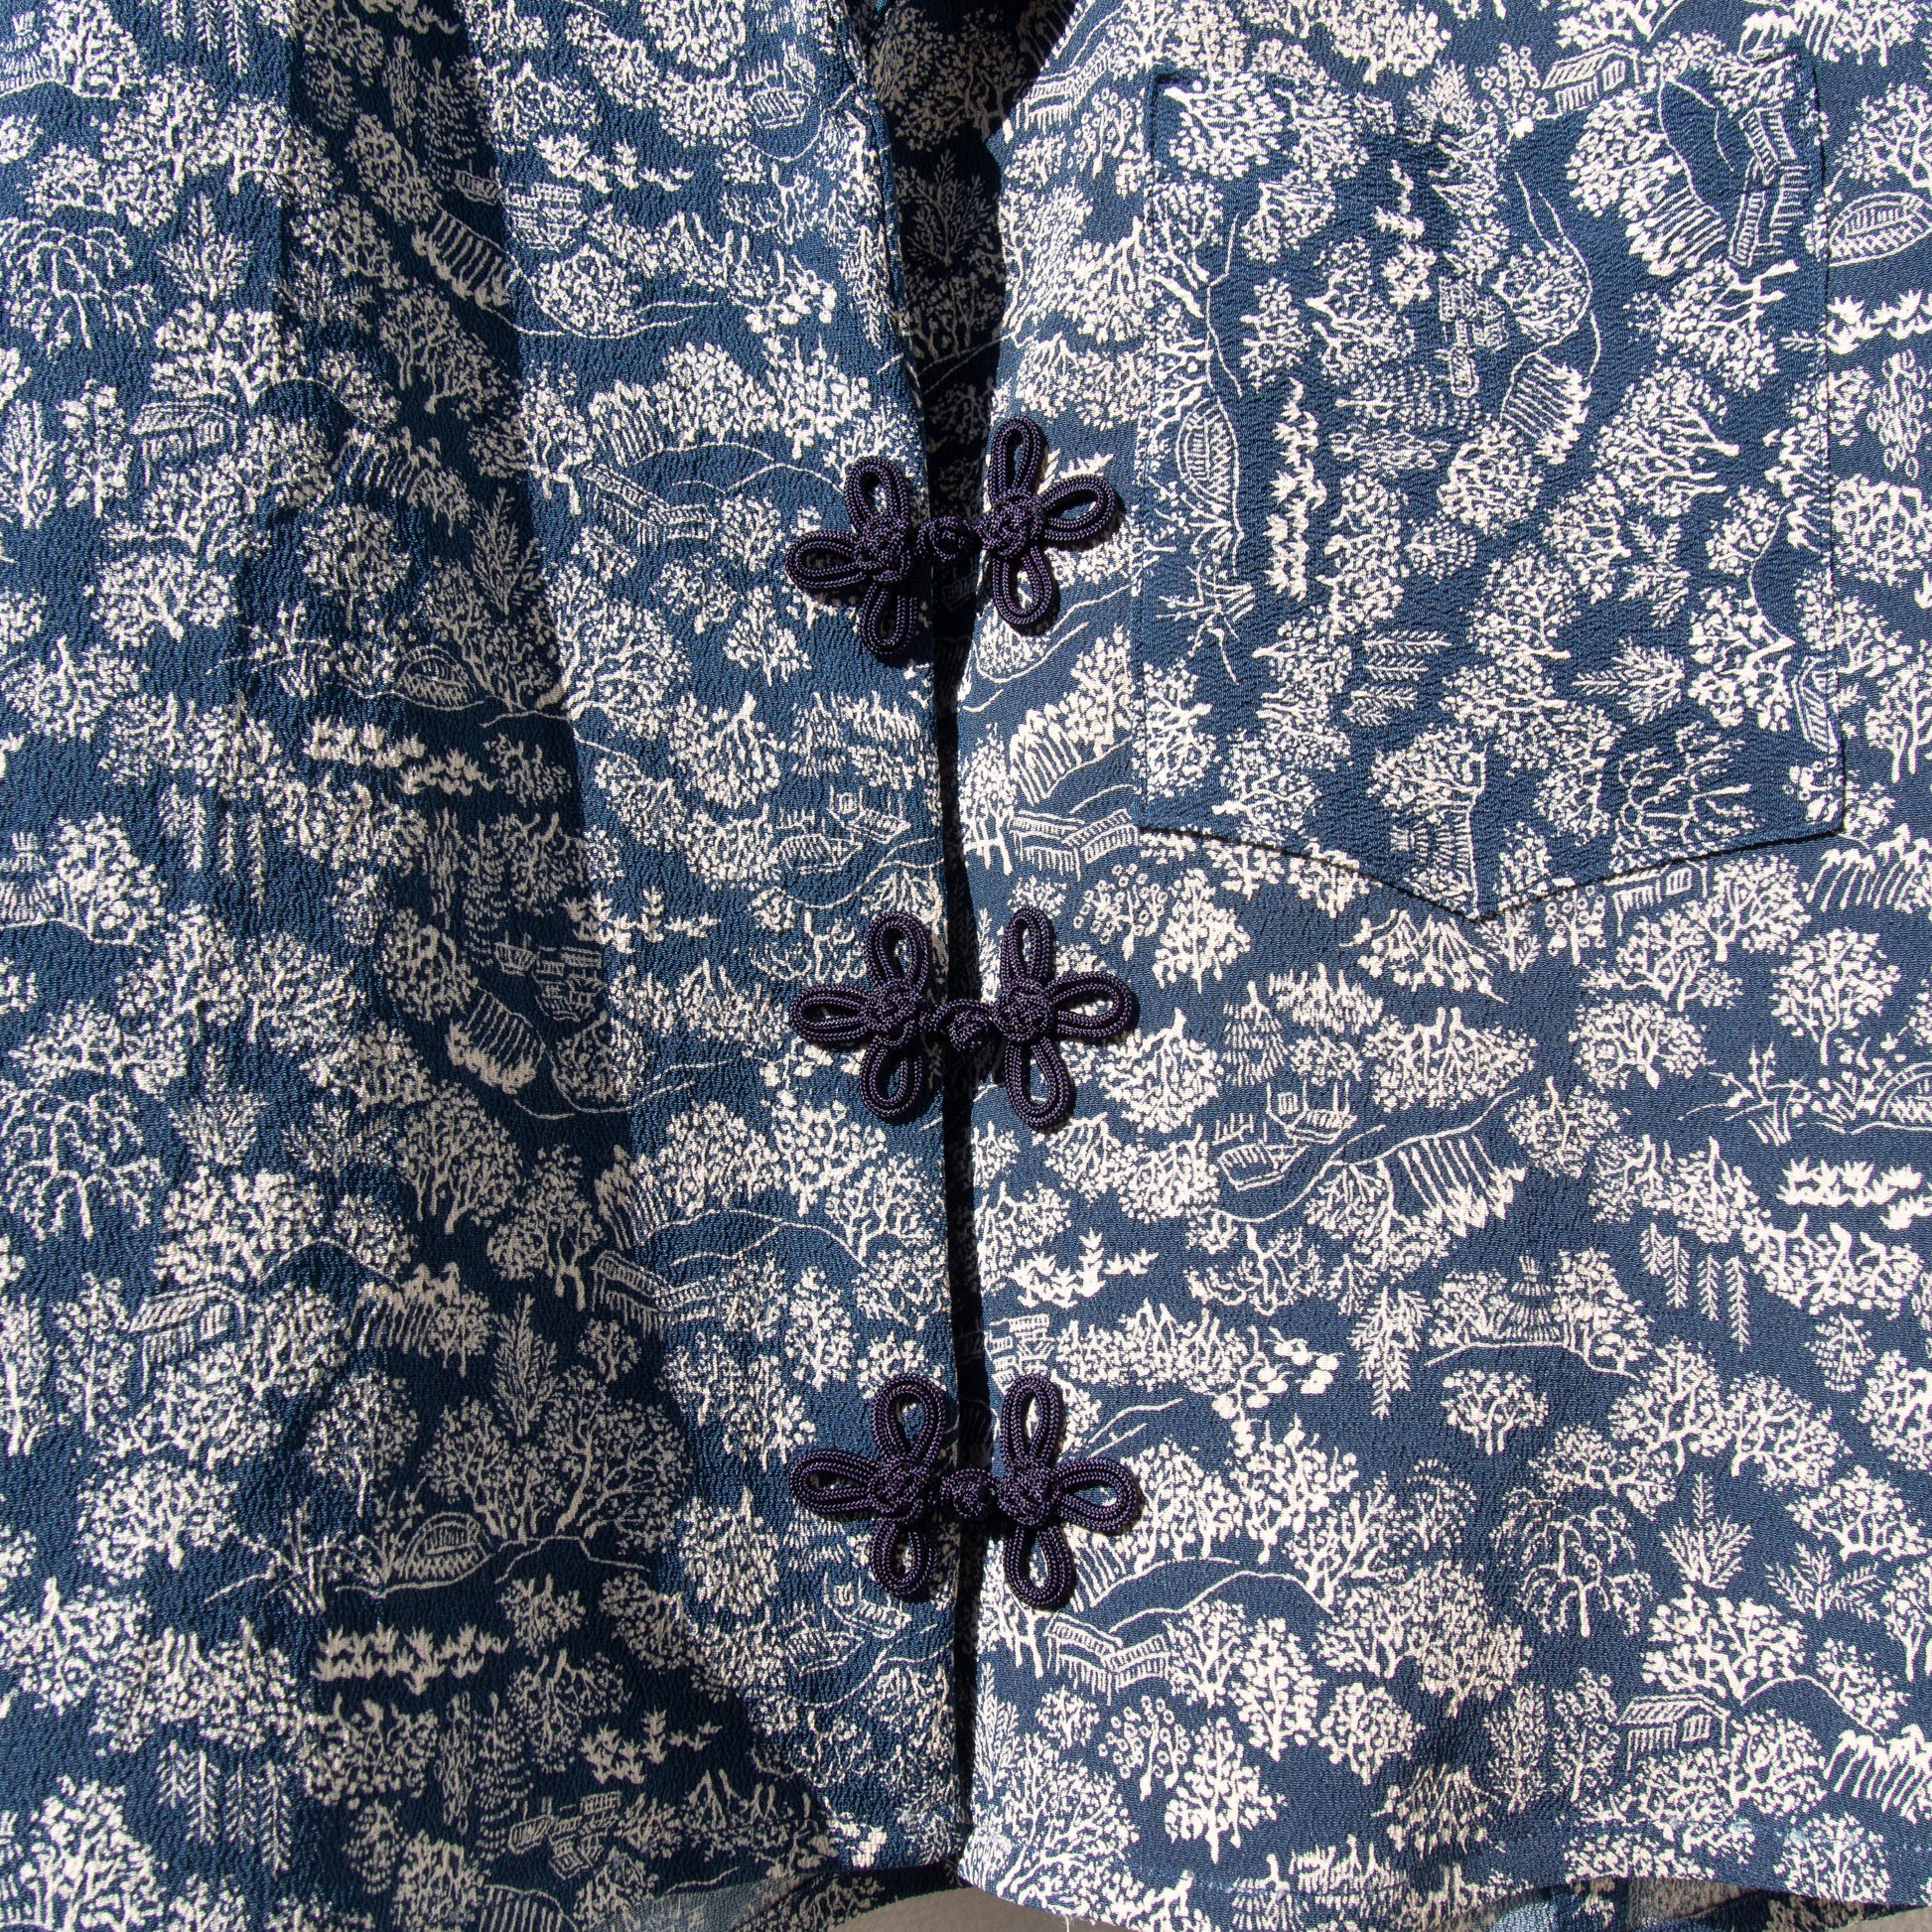 Silk shirt with frog closures made from kimono.